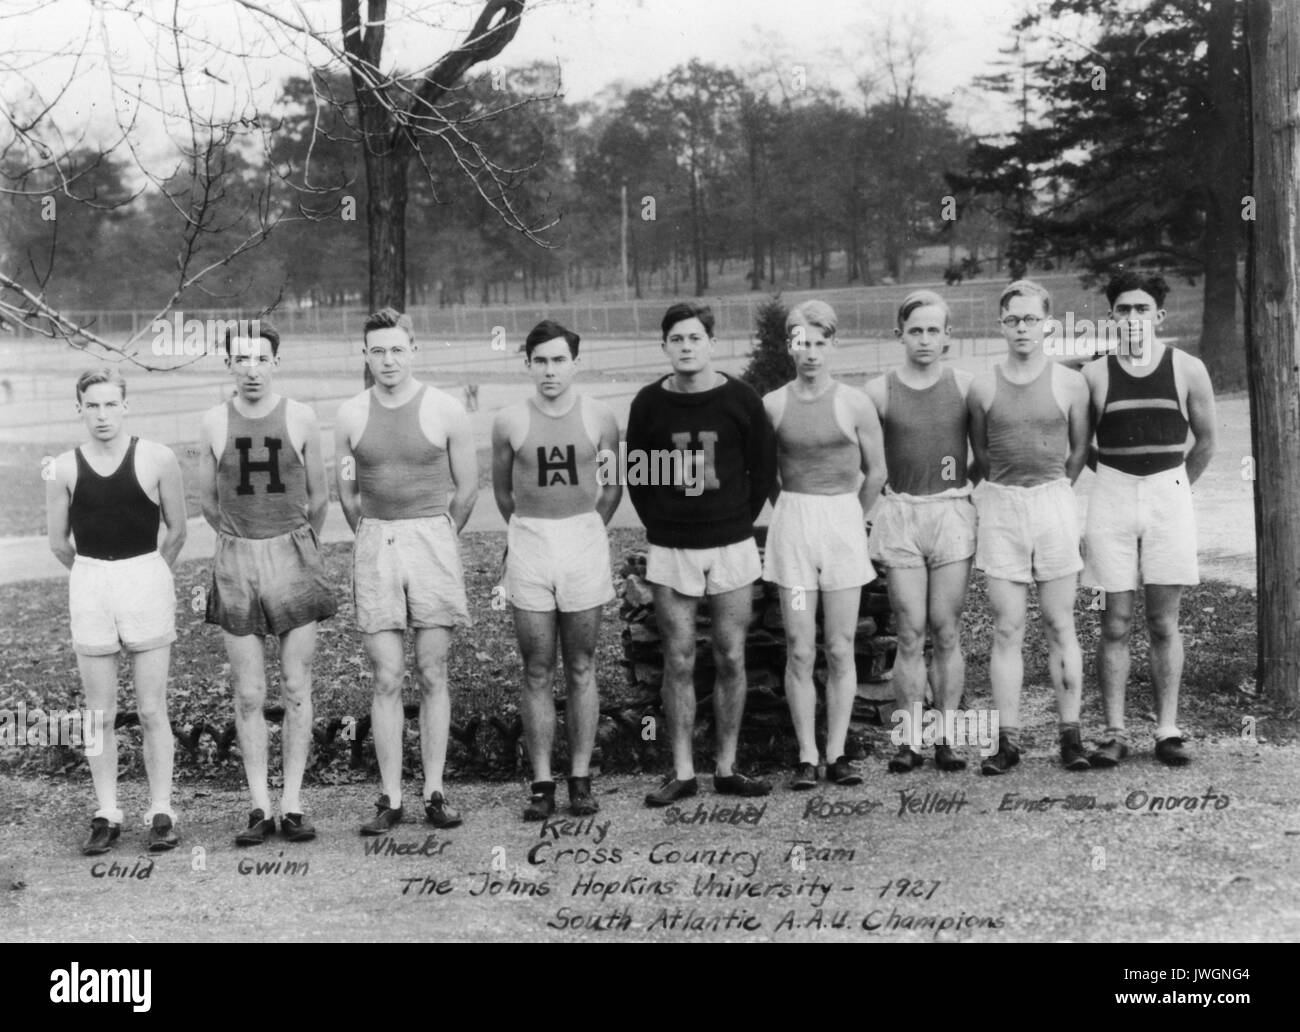 Cross Country Cross Country, varsity team photo, all members identified, standing outdoors, near tennis courts, South Atlantic AAU Champions, 1927. Stock Photo